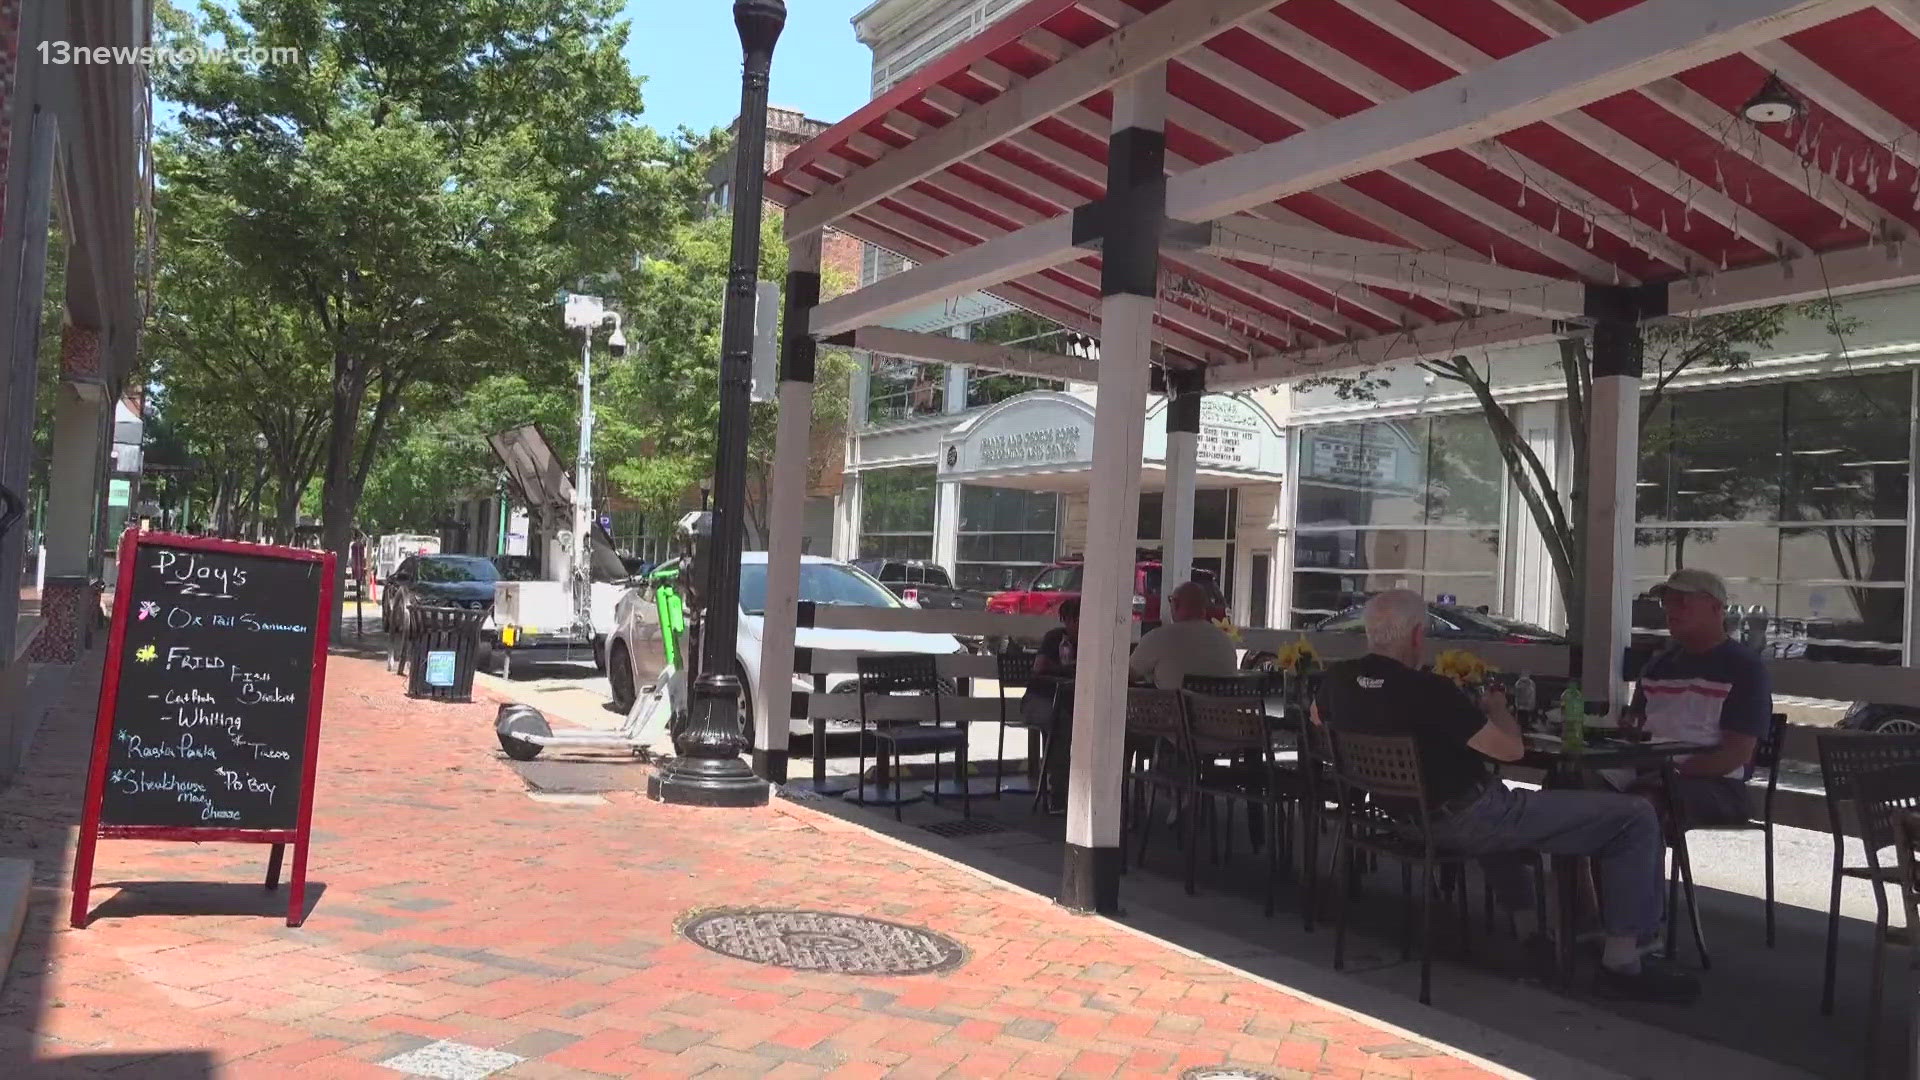 The city of Norfolk is cracking down on outside patio seating, a huge change from how the city operated just four years ago during the COVID-19 pandemic.